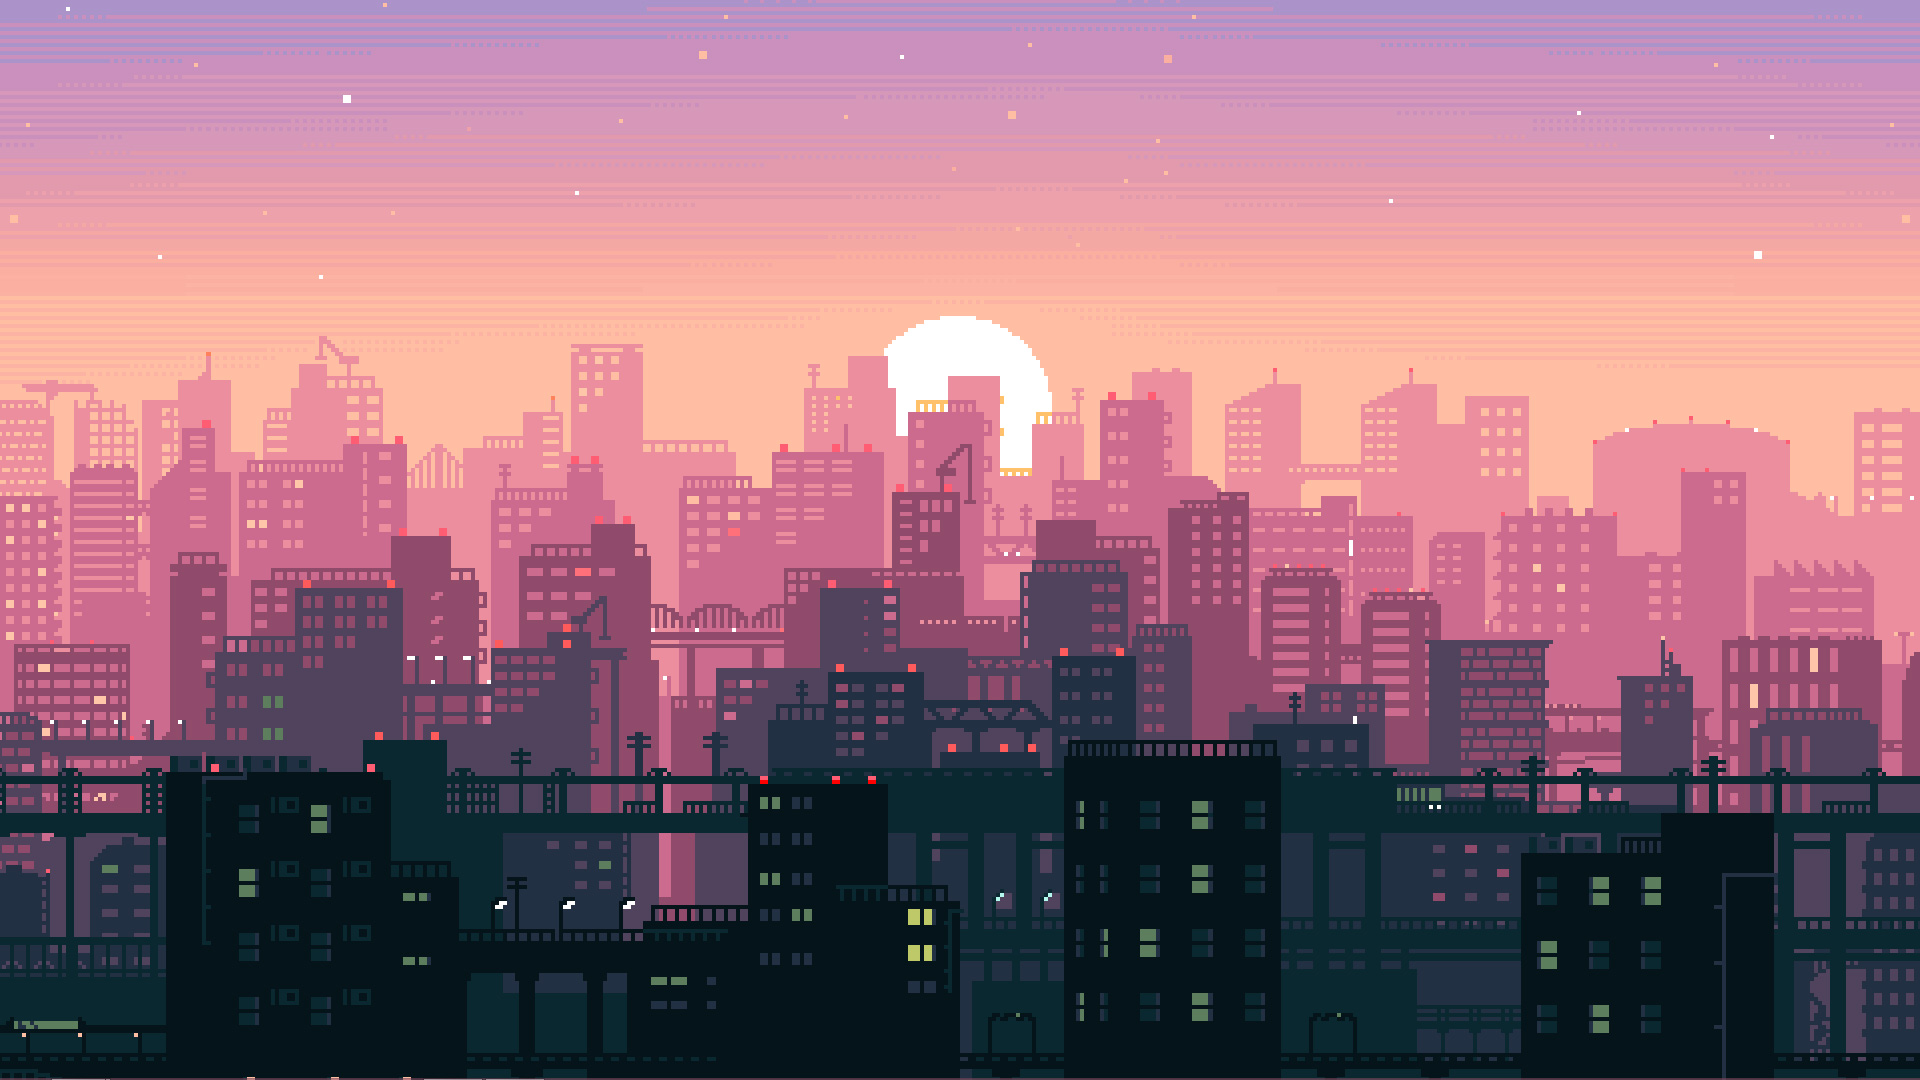 8 Bit Pixel Art City Hd Artist 4k Wallpapers Images Backgrounds Photos And Pictures